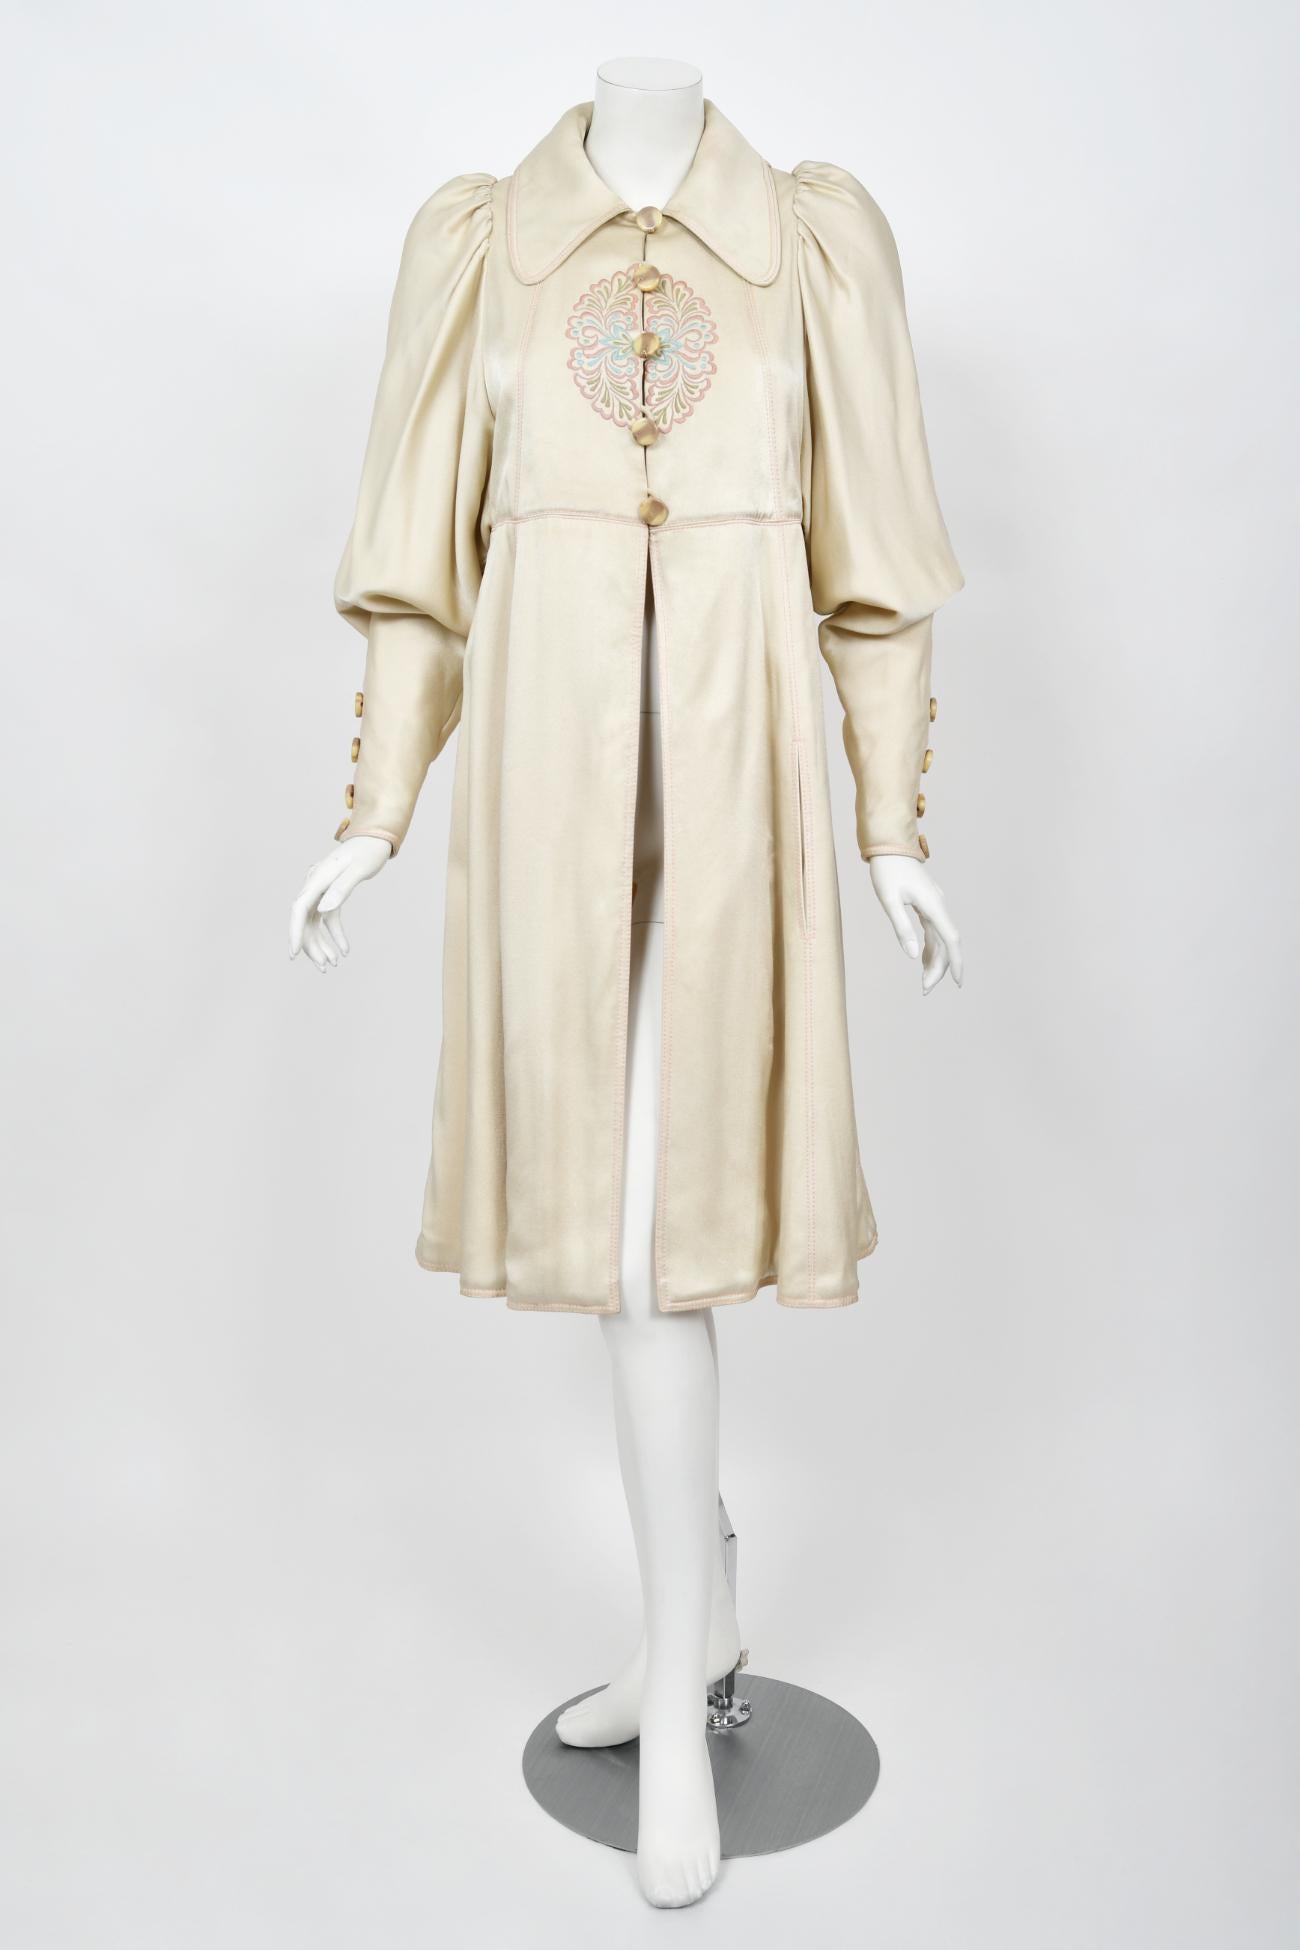 An ultra ethereal Bill Gibb of London couture two-piece ivory satin jacket set dating back to this 1972 fall-winter collection. His garments are very collectible and found in museum's around the globe. Bill Gibb, a forgotten fashion hero from the